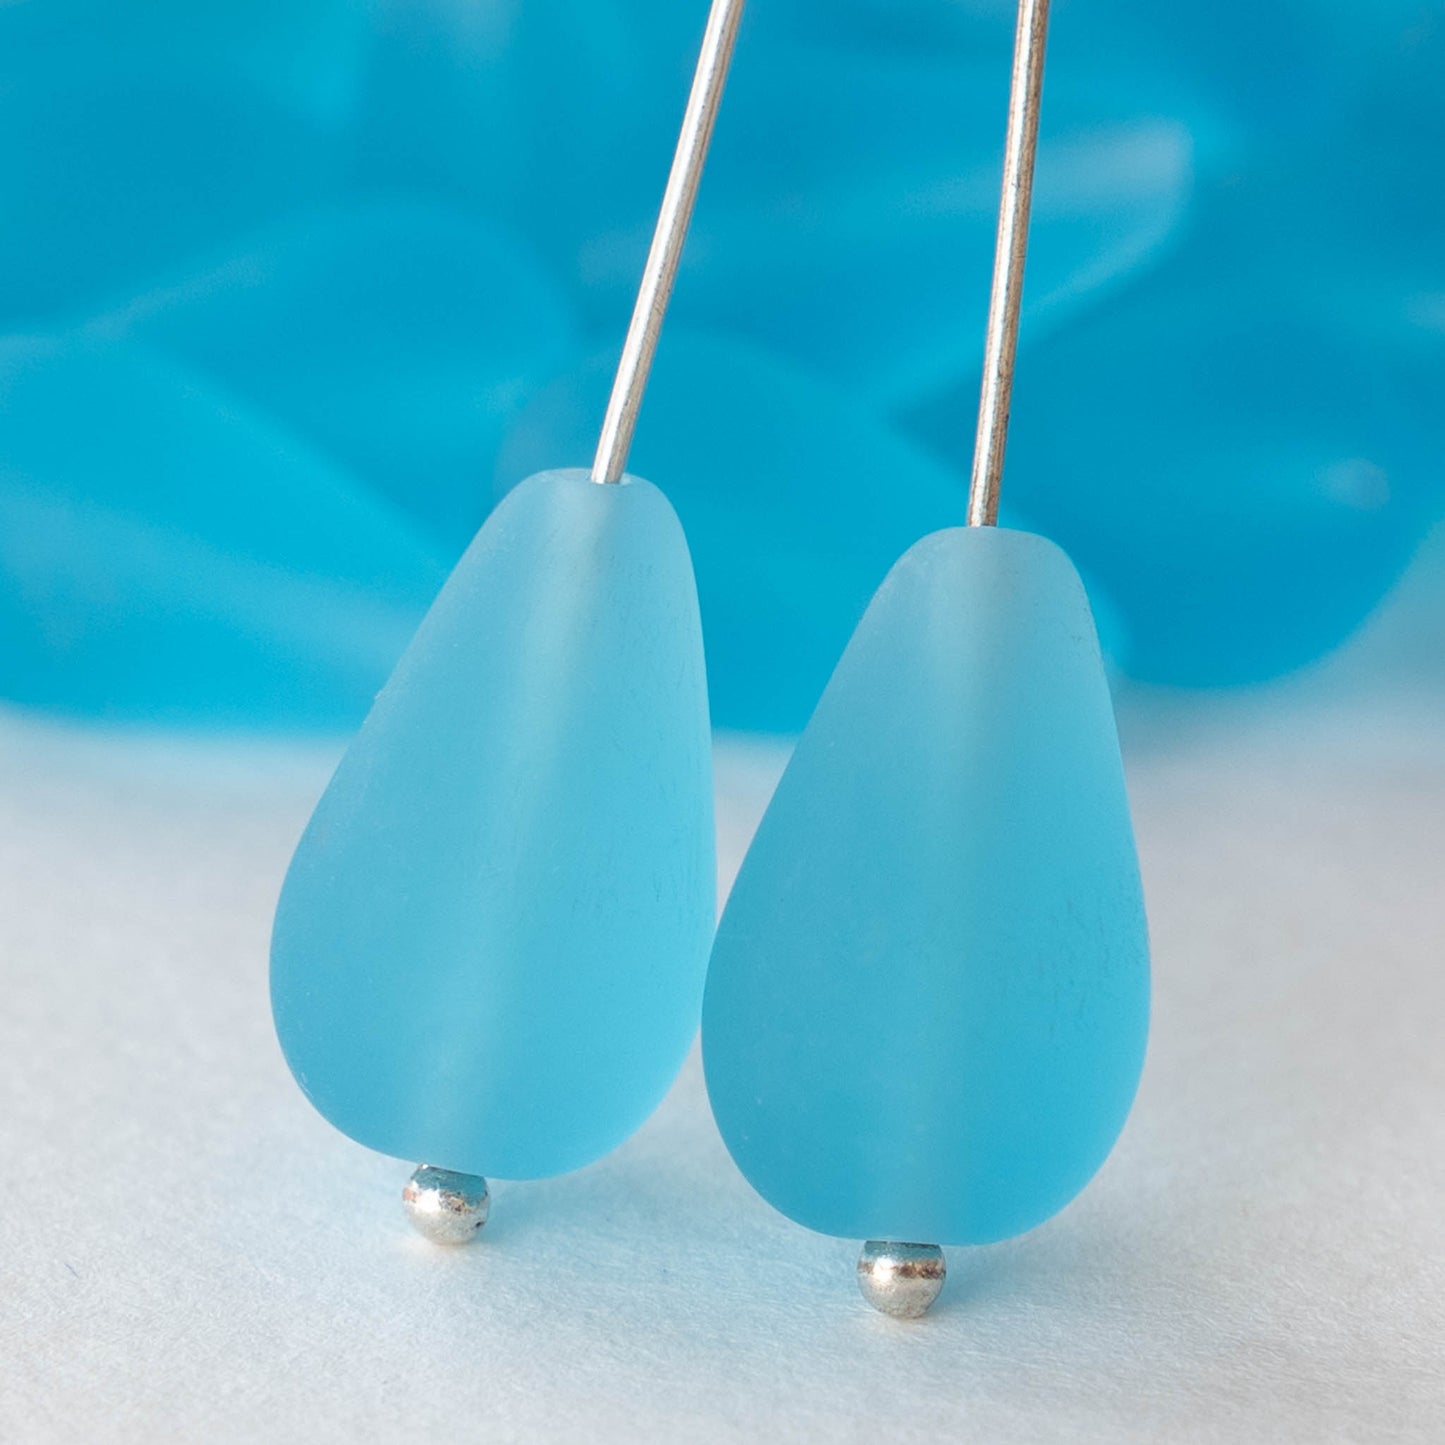 11x18mm Long Drilled Drops - Frosted Aqua Blue - 20 Beads